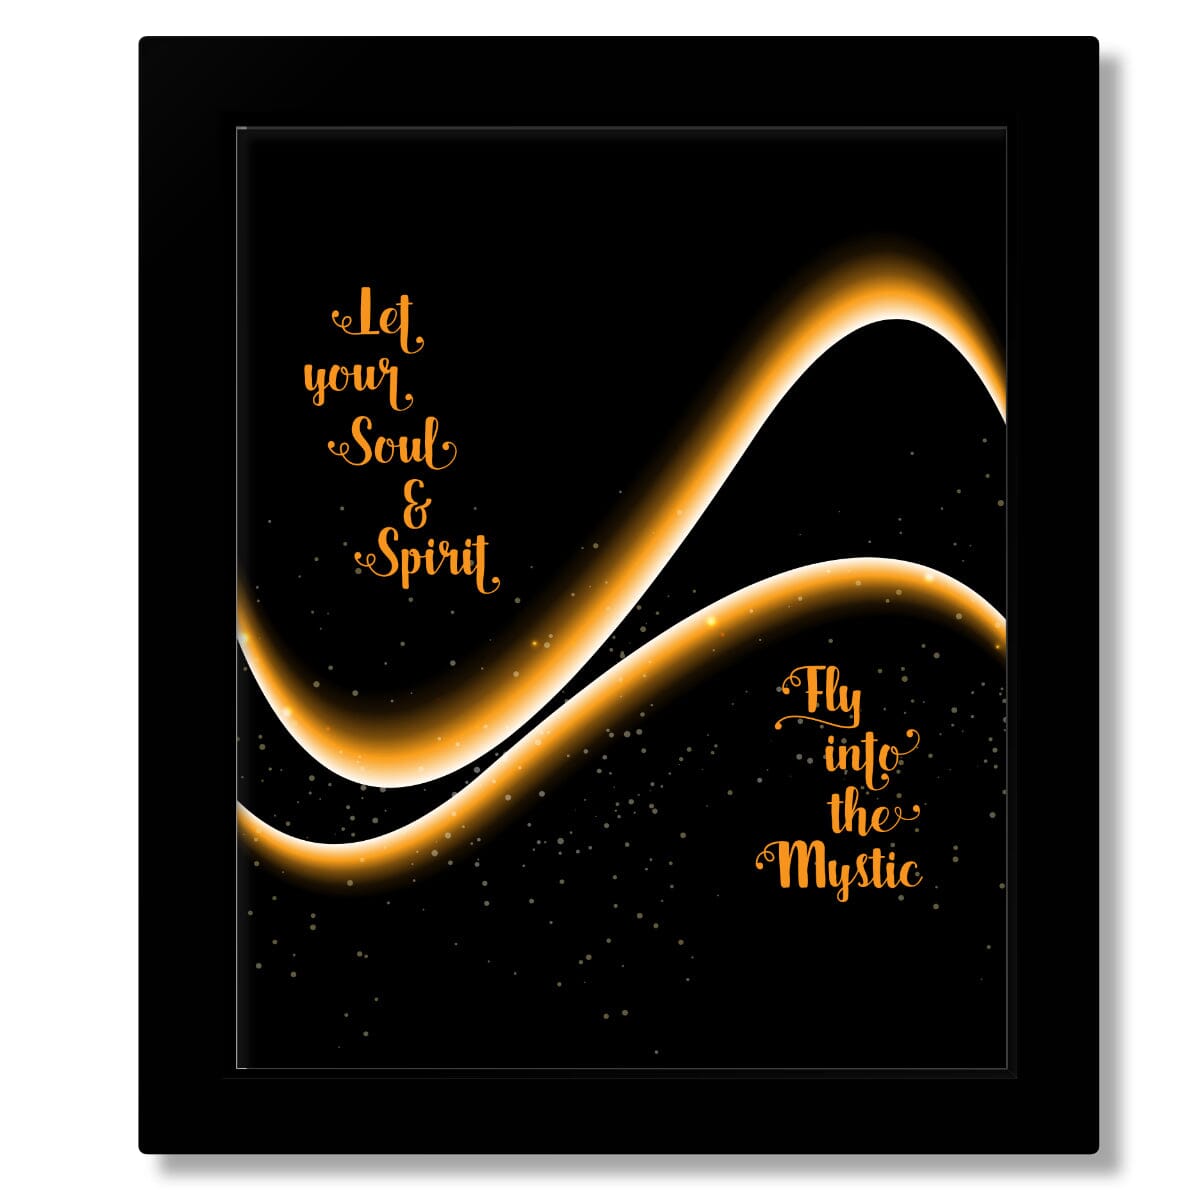 Into the Mystic by Van Morrison - Lyrical Art Music Poster Song Lyrics Art Song Lyrics Art 8X10 Framed Print without Mat 